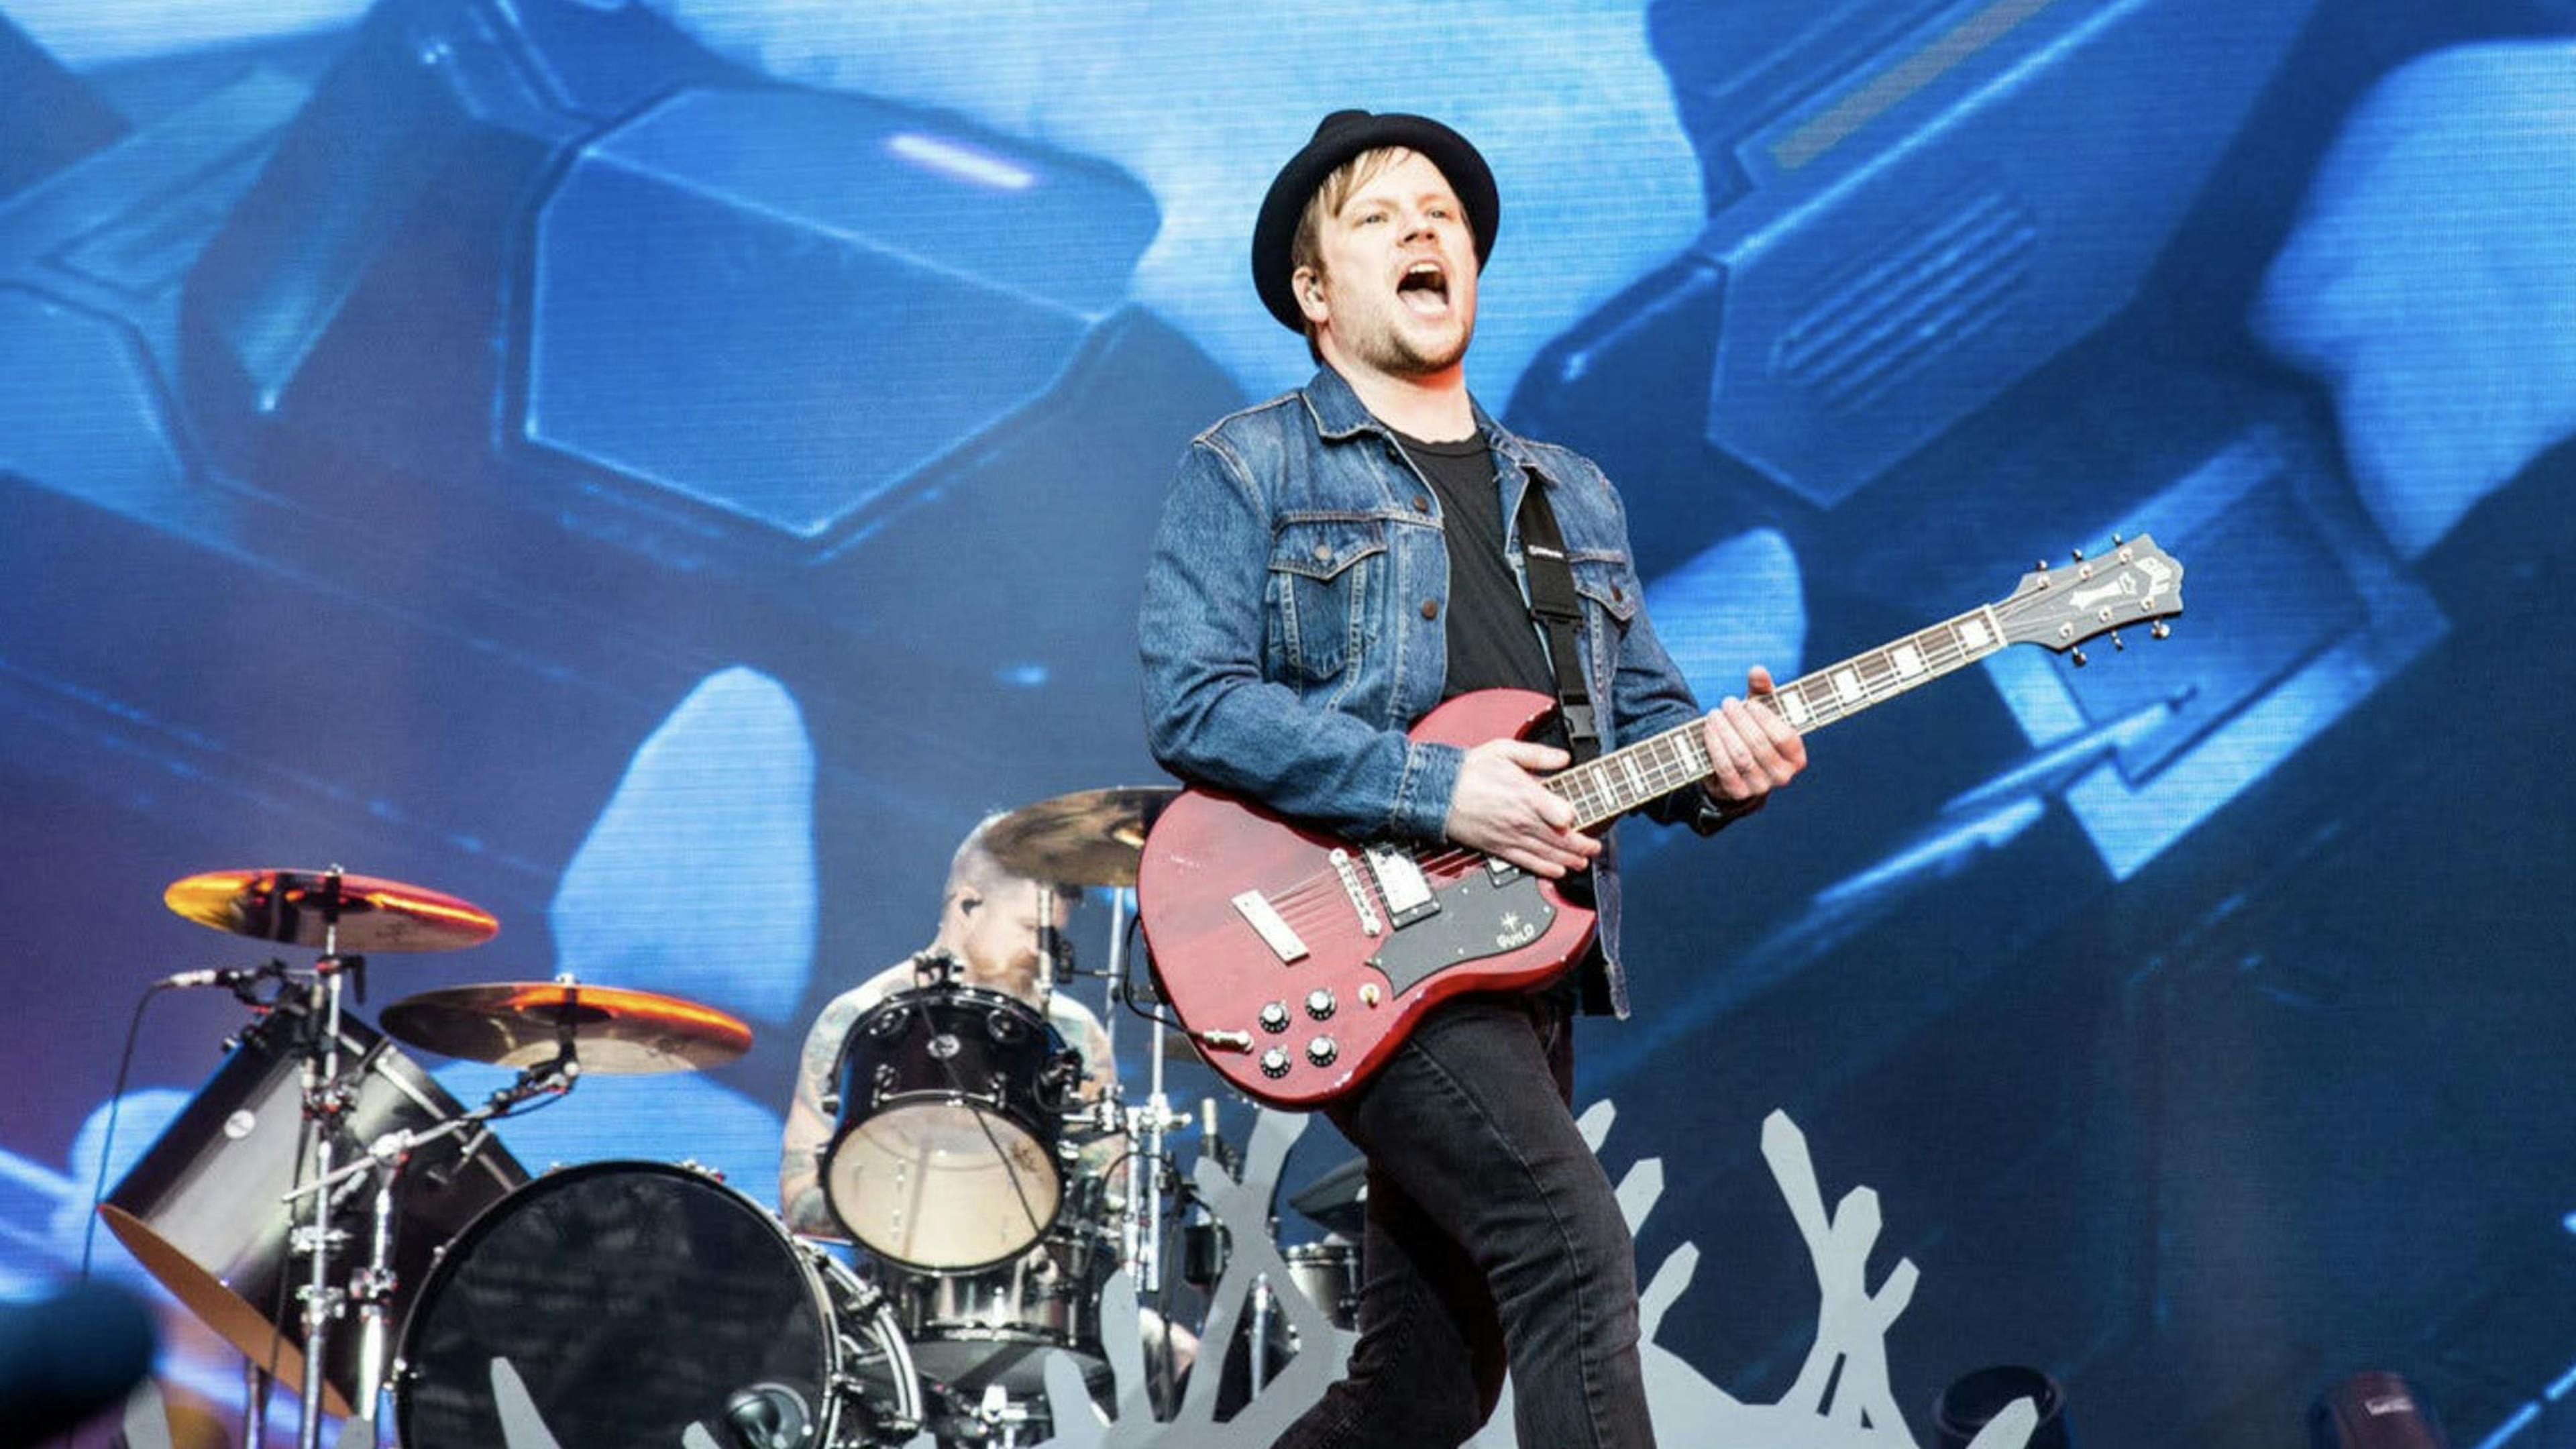 Fall Out Boy: “We spent the last year jamming ideas in a tiny room”